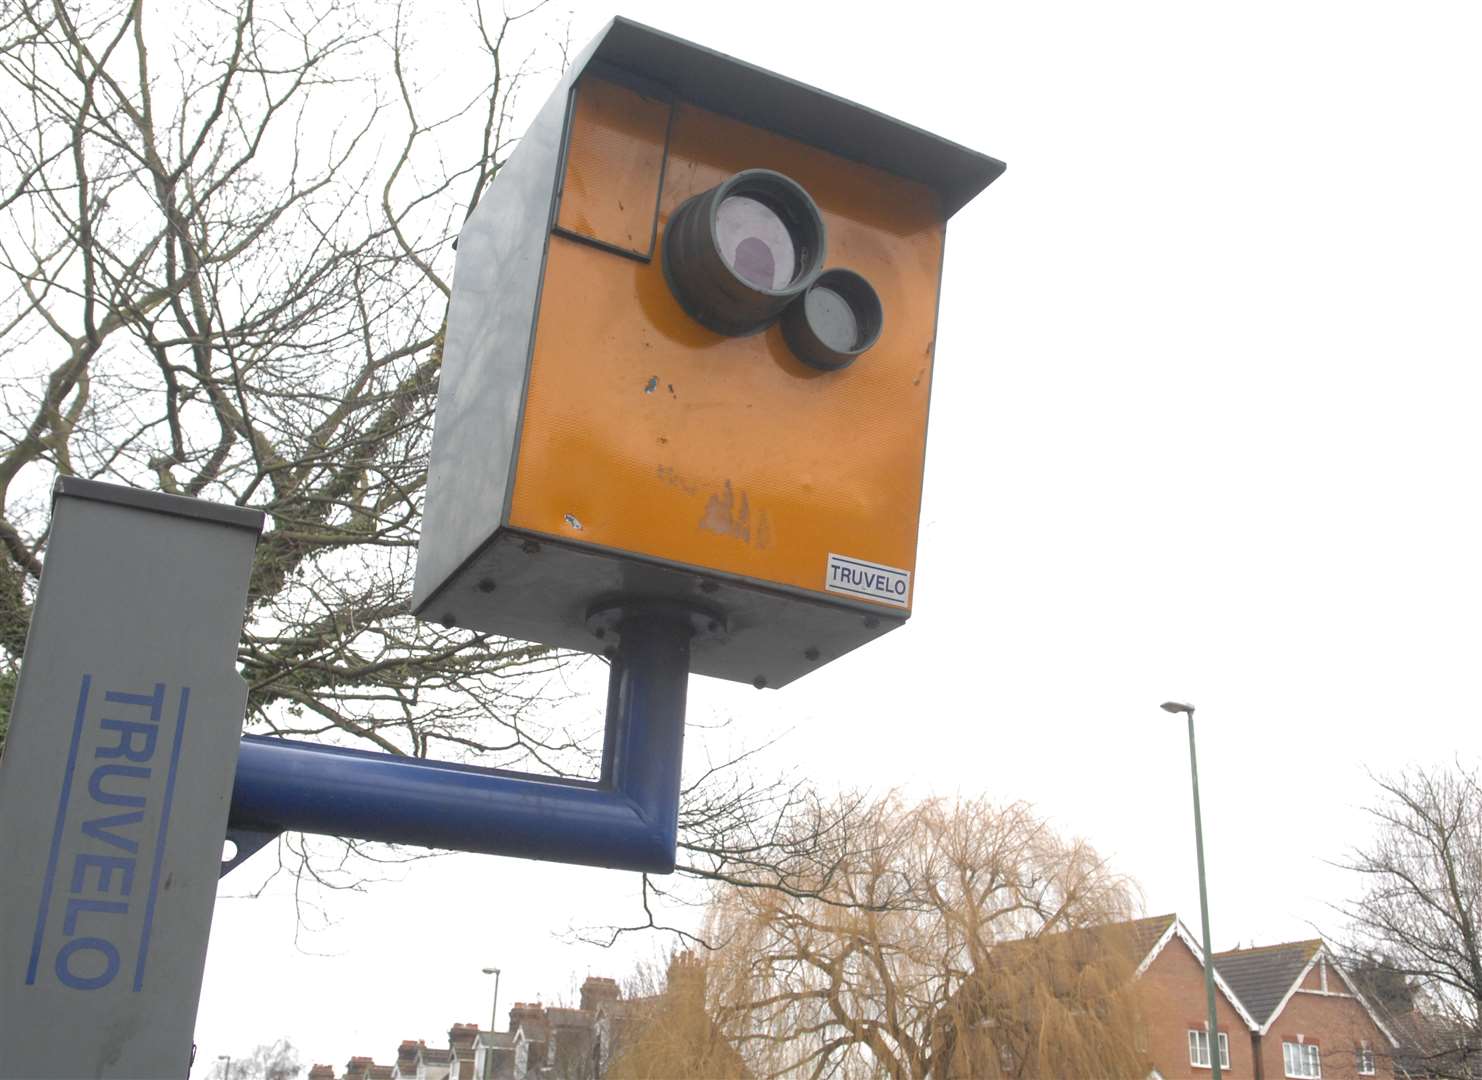 The old analogue speed camera along Loose Road, Maidstone was never replaced